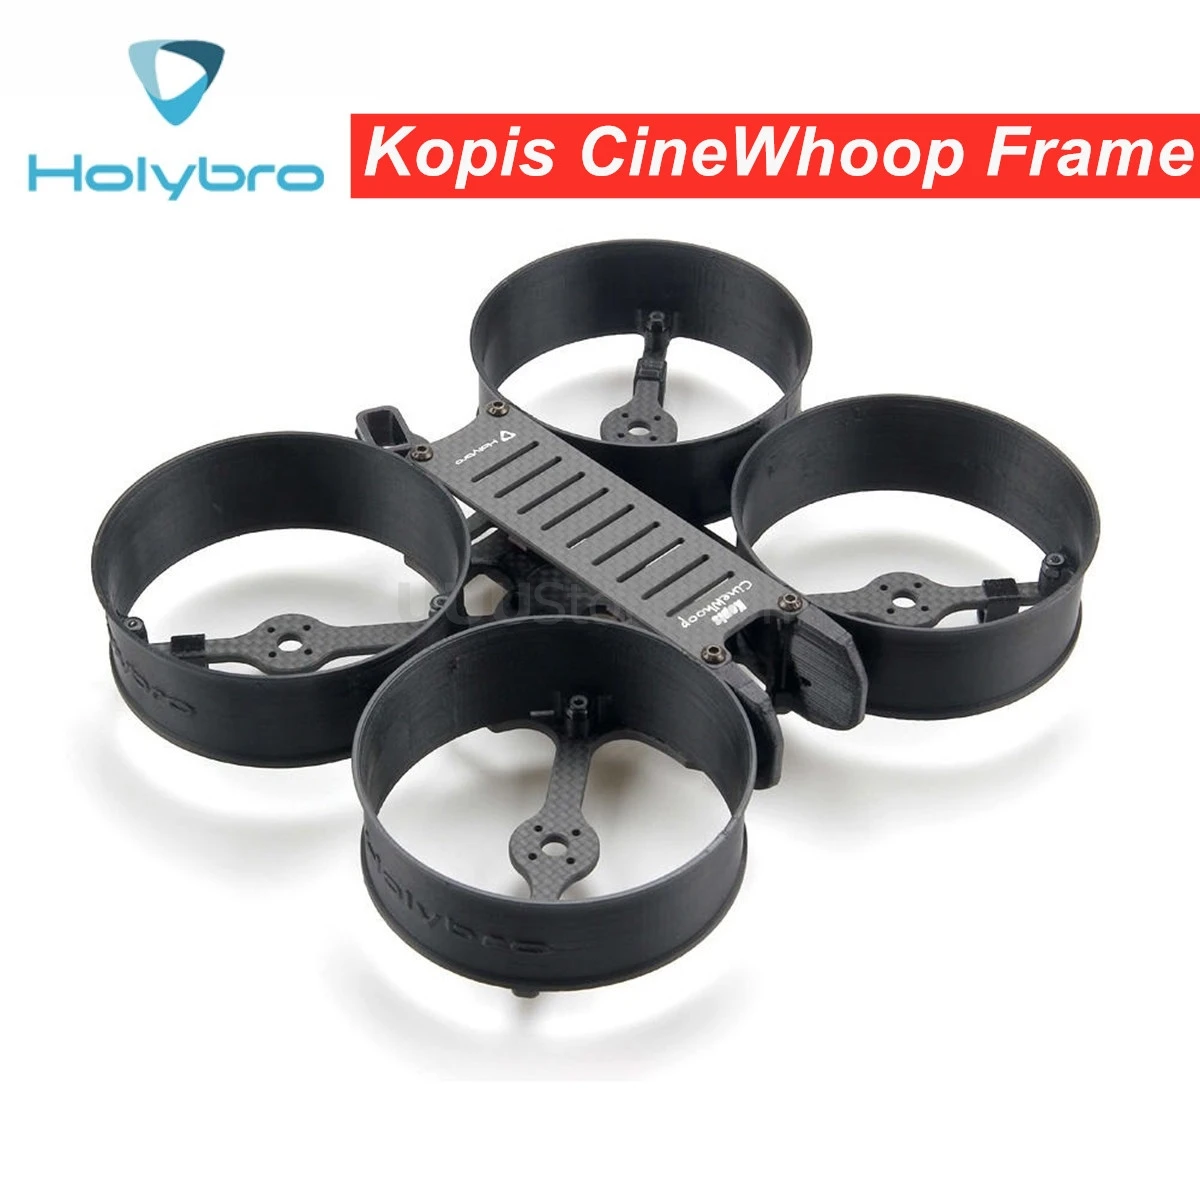 Holybro Kopis CineWhoop Frame 149mm 3 Inch For Air Unit FPV Racing RC Drone MultiRotor Multicopter Parts Accessories 1